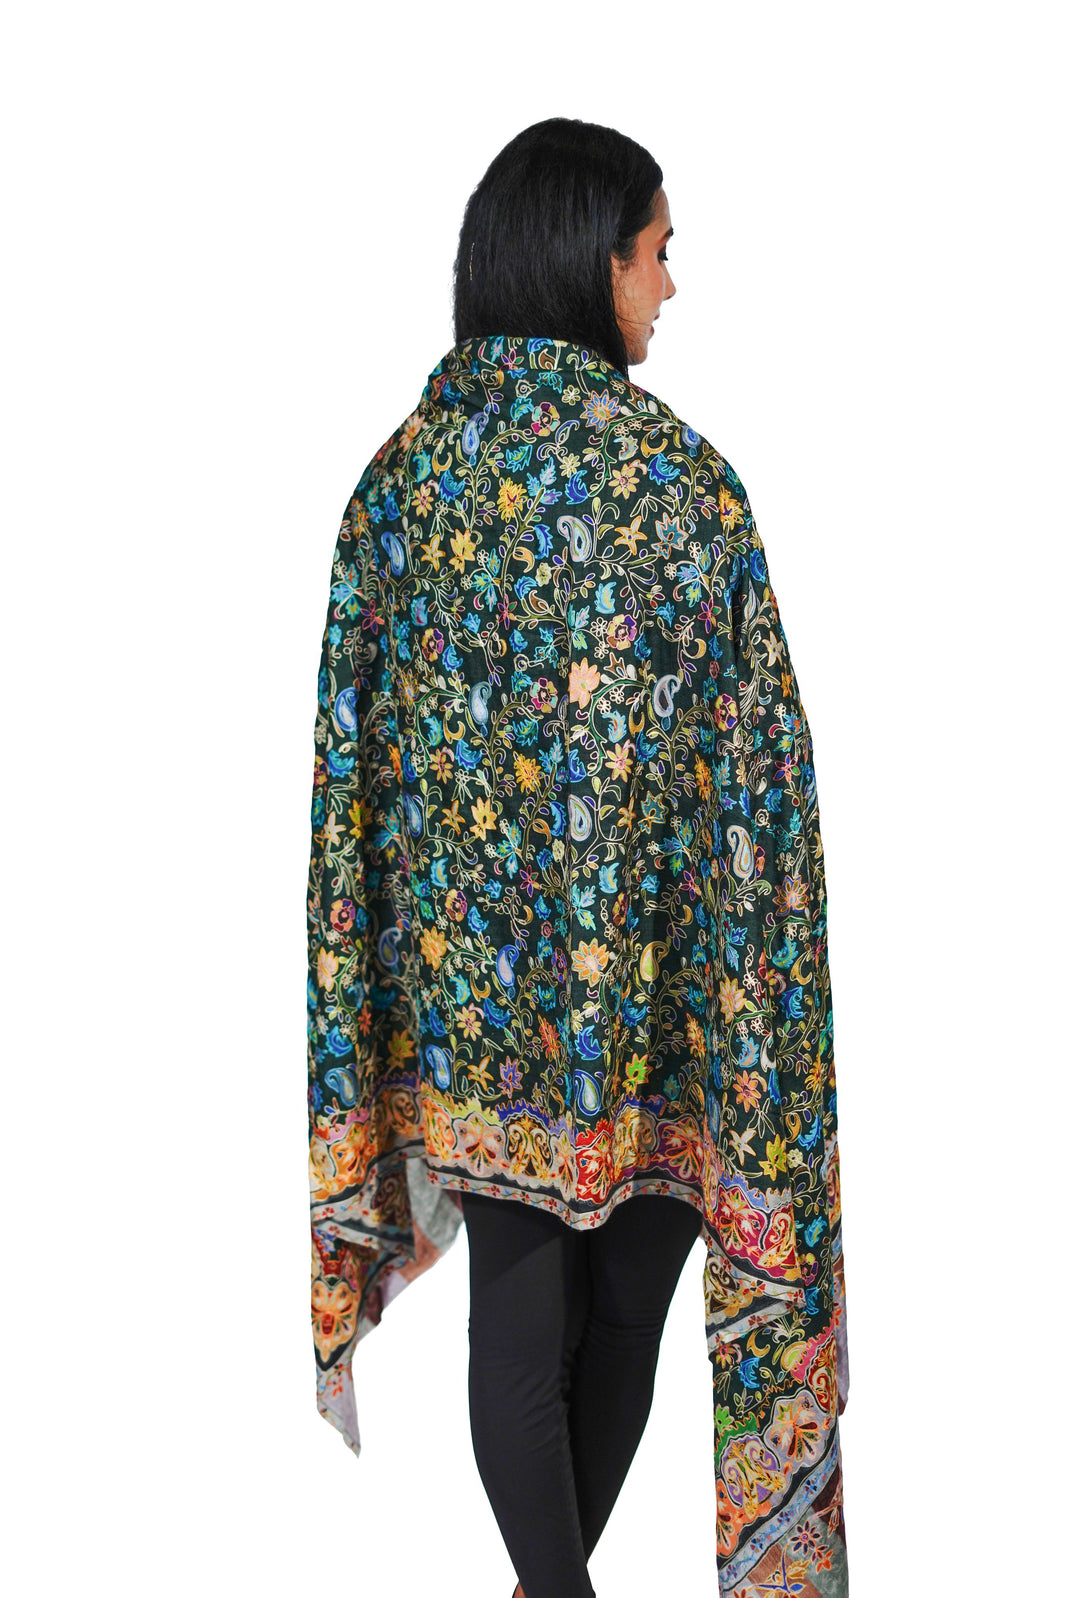 Heritage Black Embroidered Printed Shawl for Women